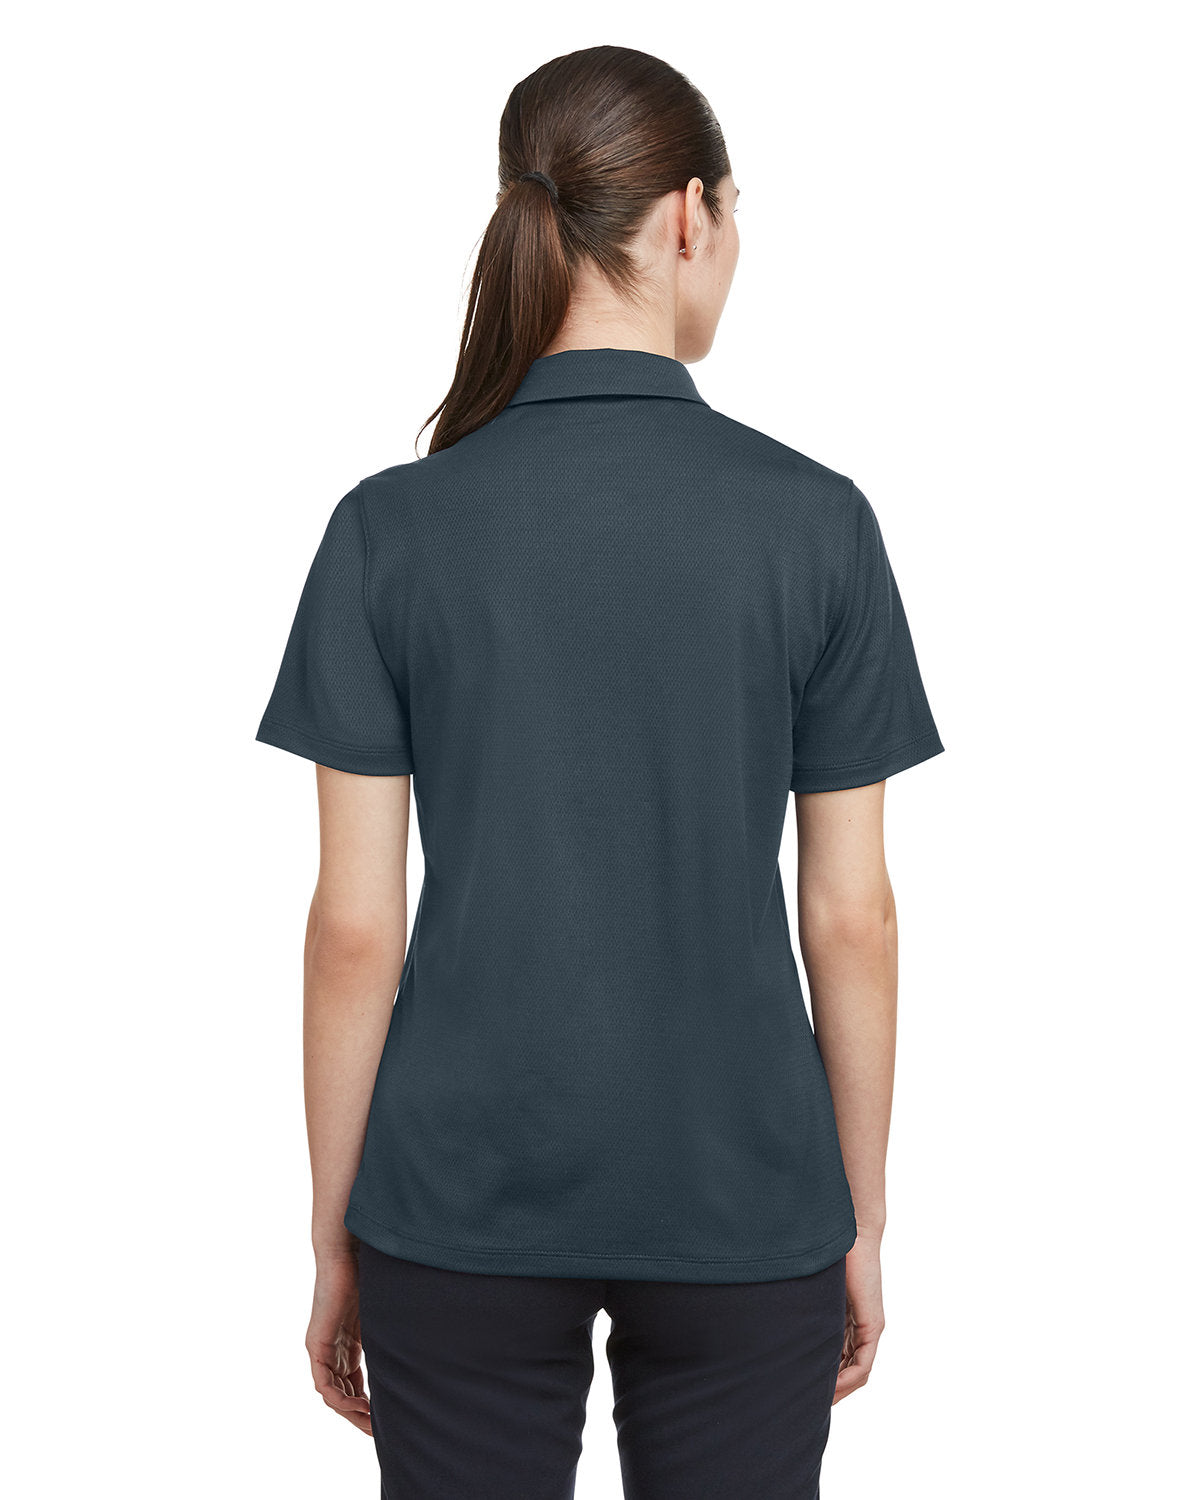 Under Armour Ladies Tech Branded Polos, Stealth Grey